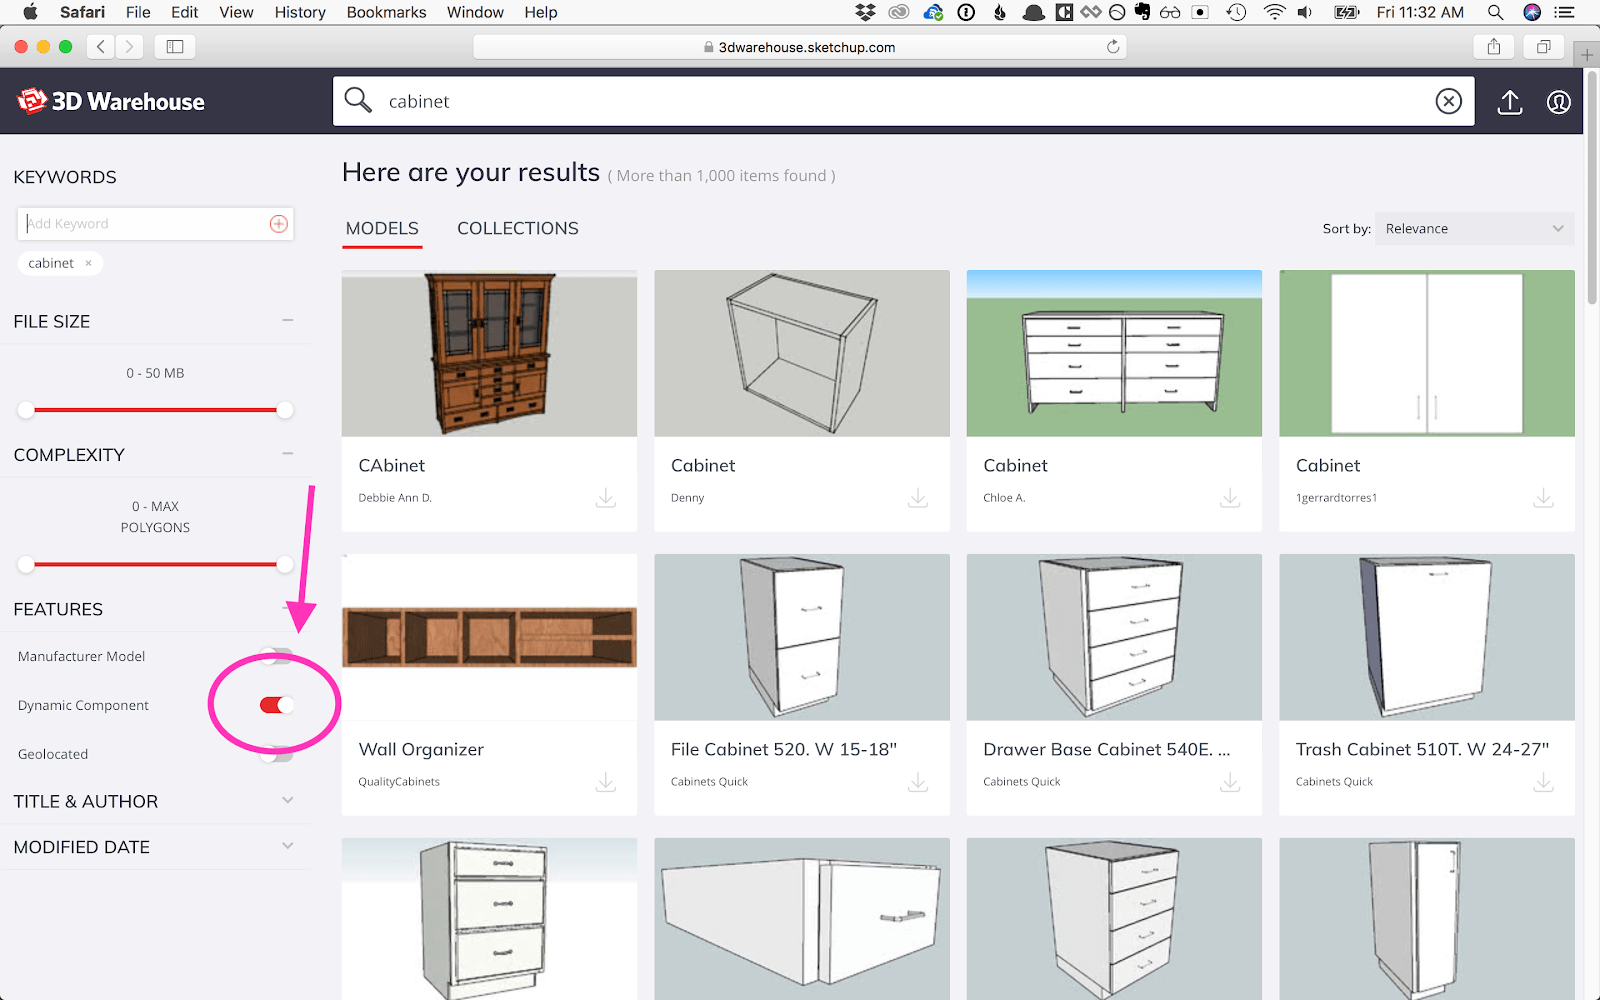 sketchup library components